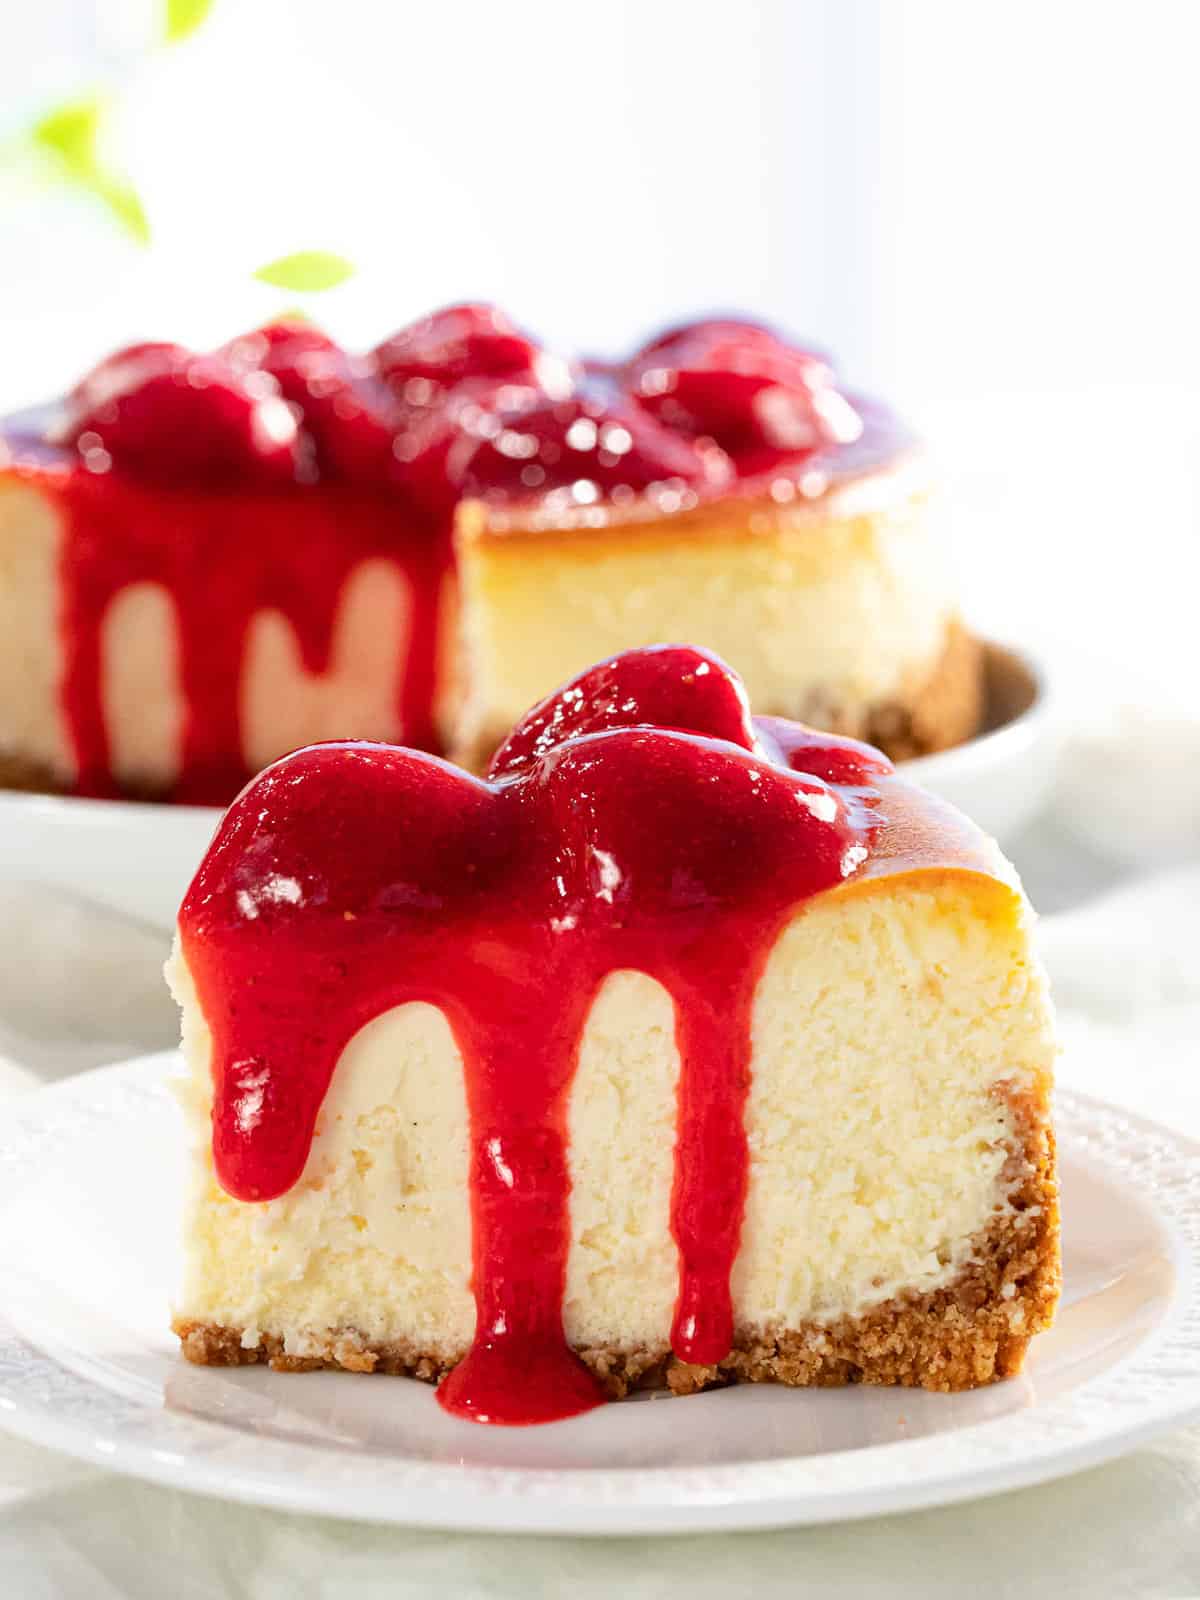 Strawberry sauce on top of cheesecake.